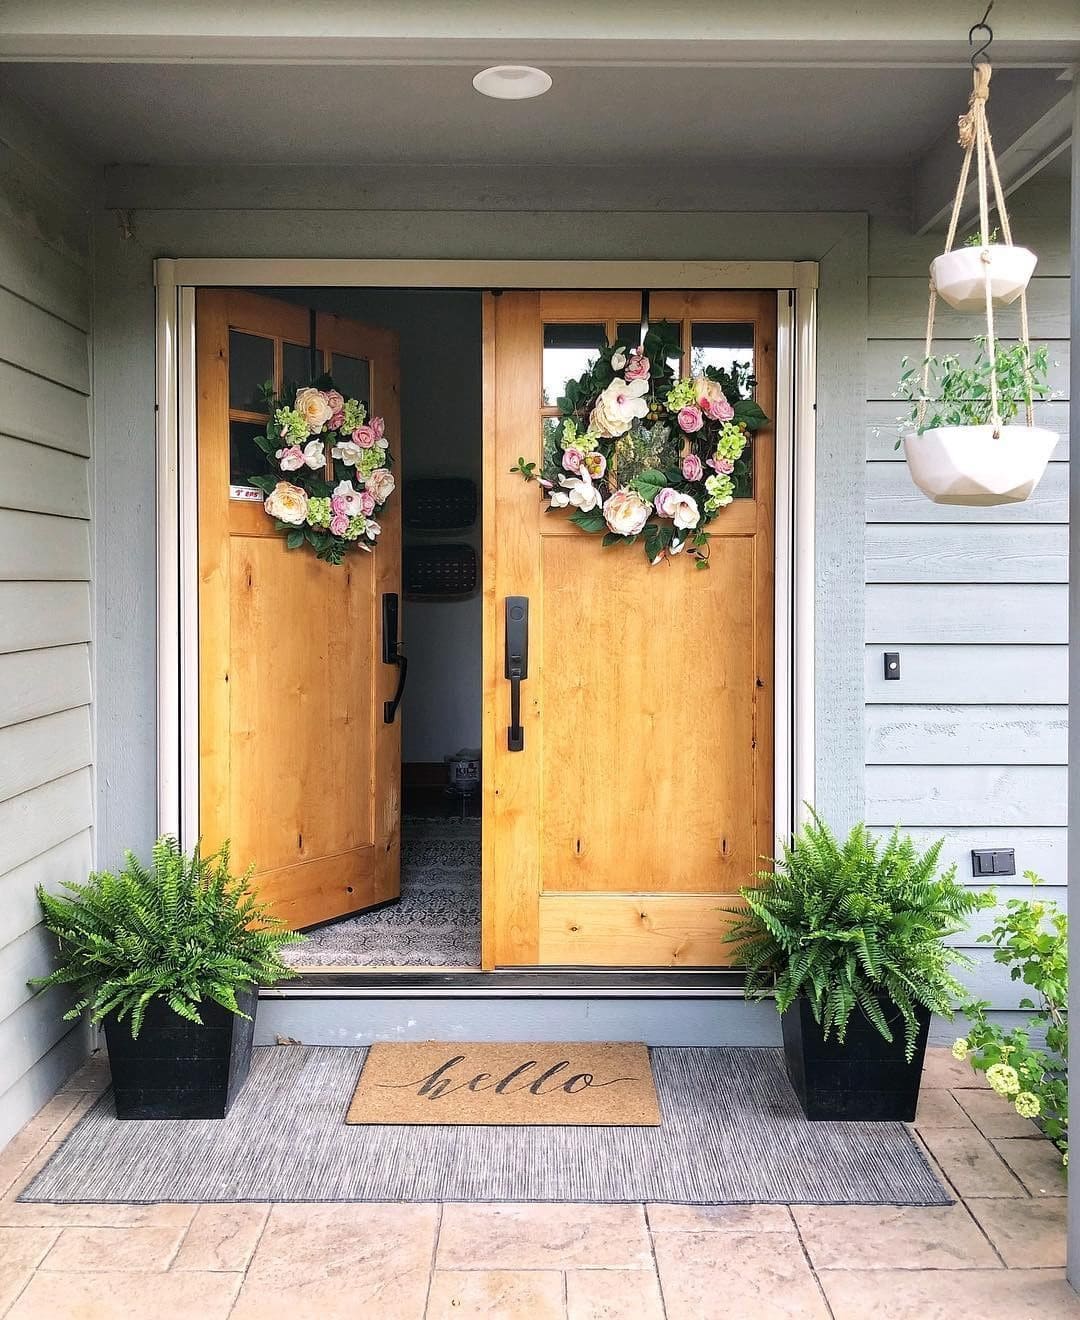 24 beautiful entryway decoration ideas with plants - 77